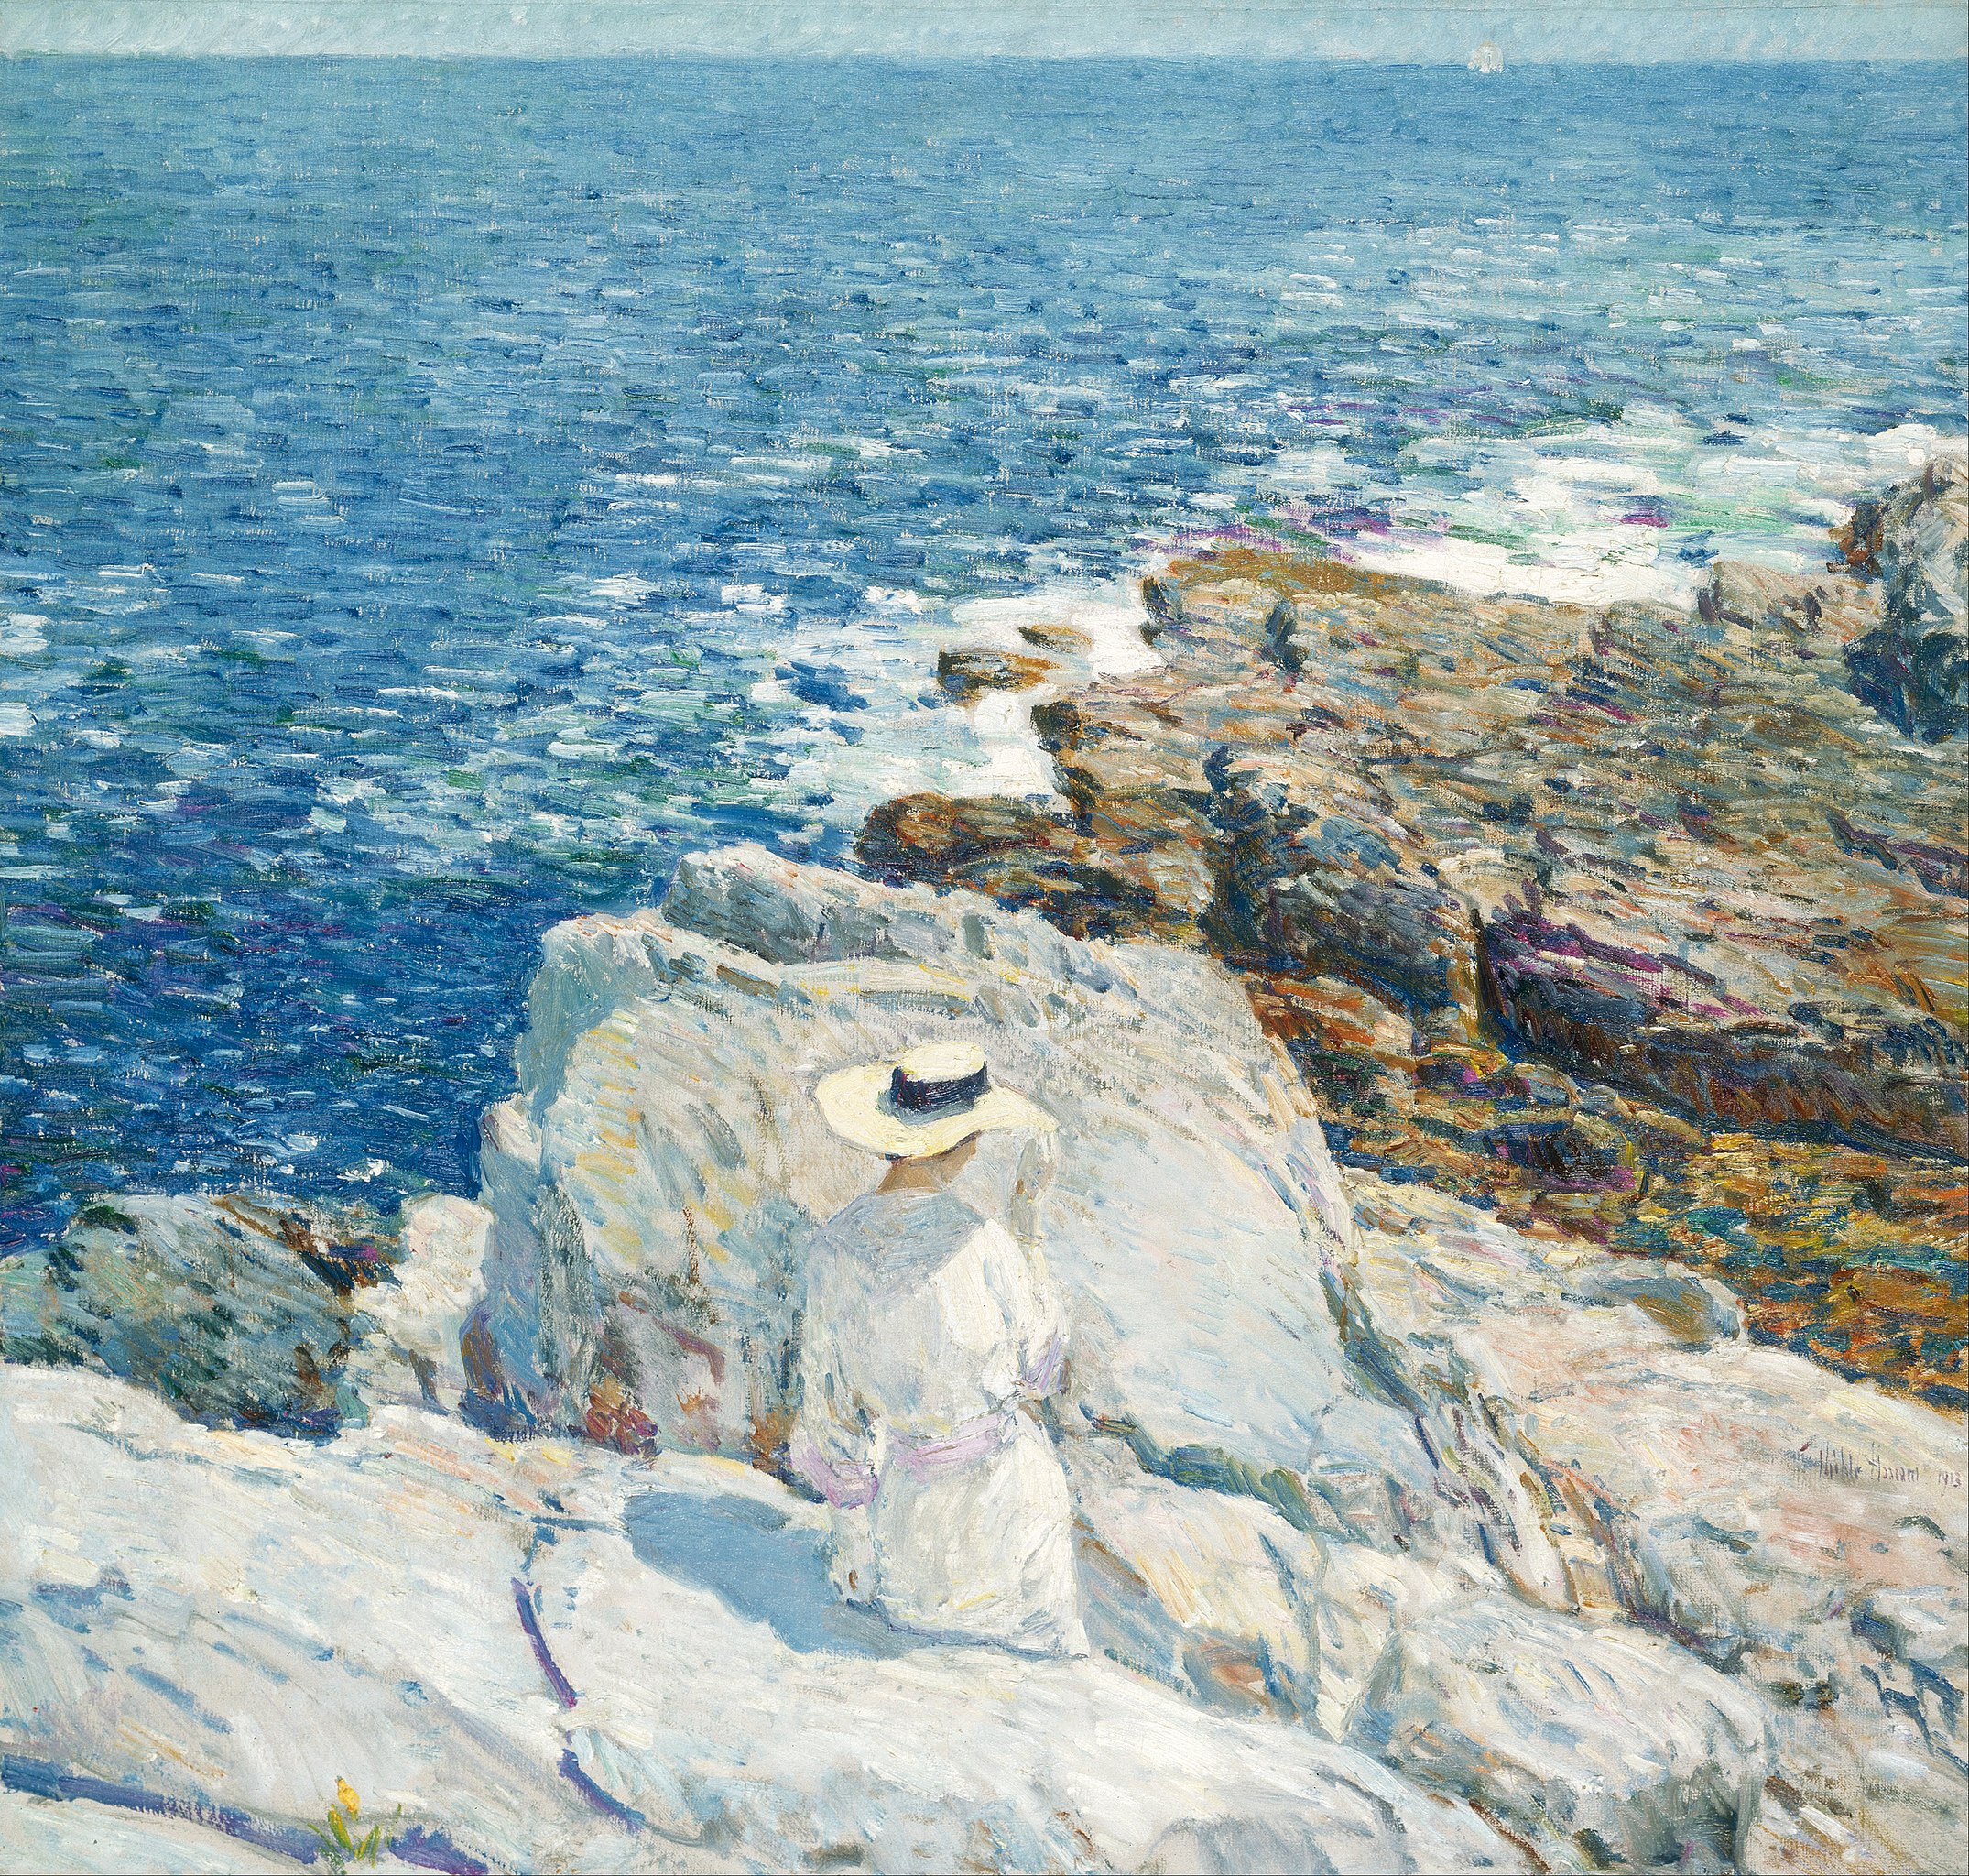 The South Ledges, Appledore by Frederick Childe Hassam - 1913 - 87 x 91 cm Museo Smithsoniano de Arte Americano